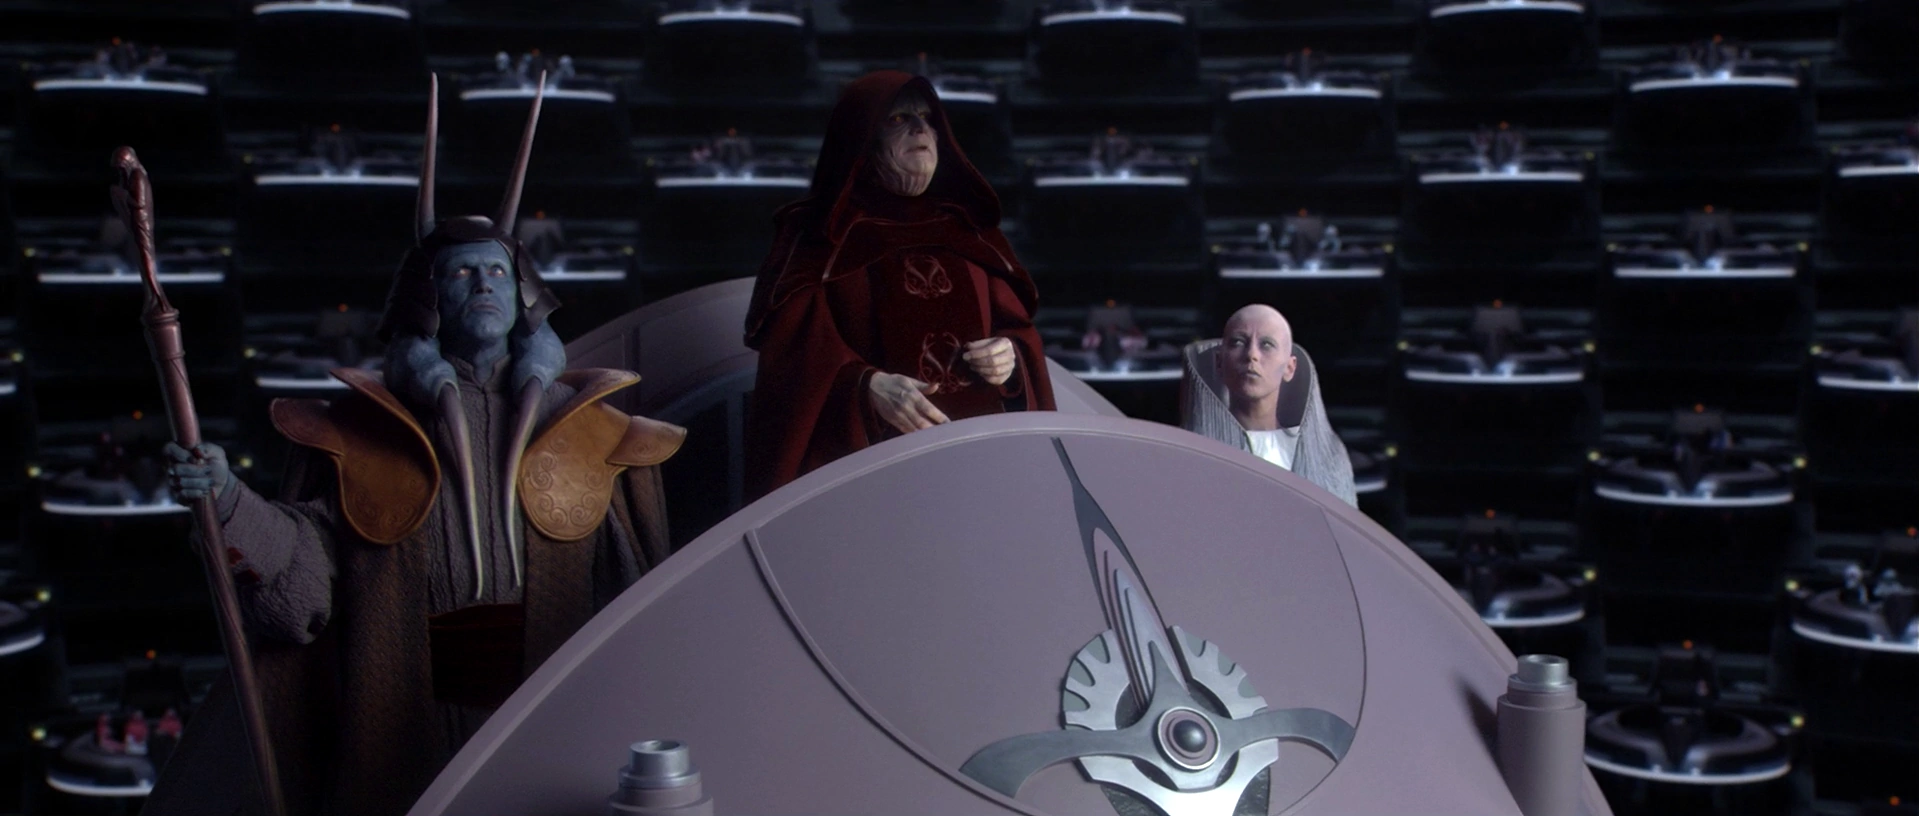 Palpatine announces new order